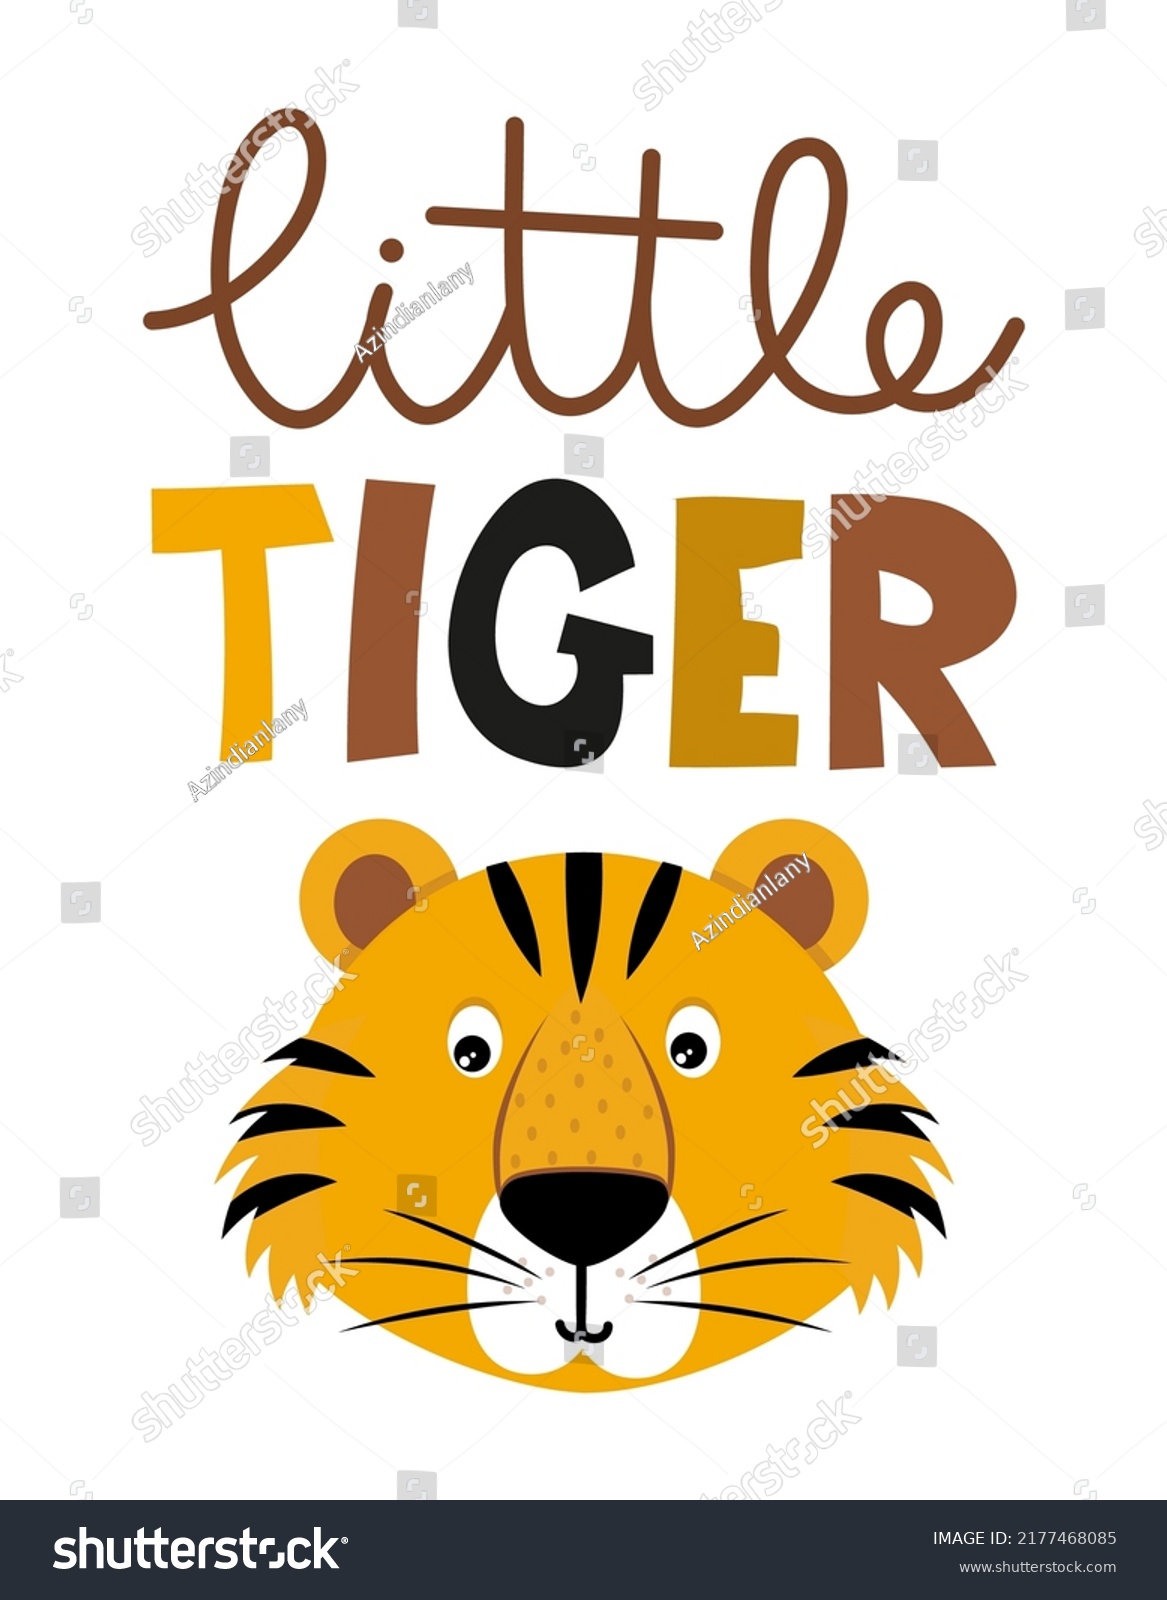 SVG of Little Tiger - funny Tiger character drawing. Lettering poster or t shirt textile graphic design.  Cute lion character illustration. Handwritten text. Scandinavian style svg